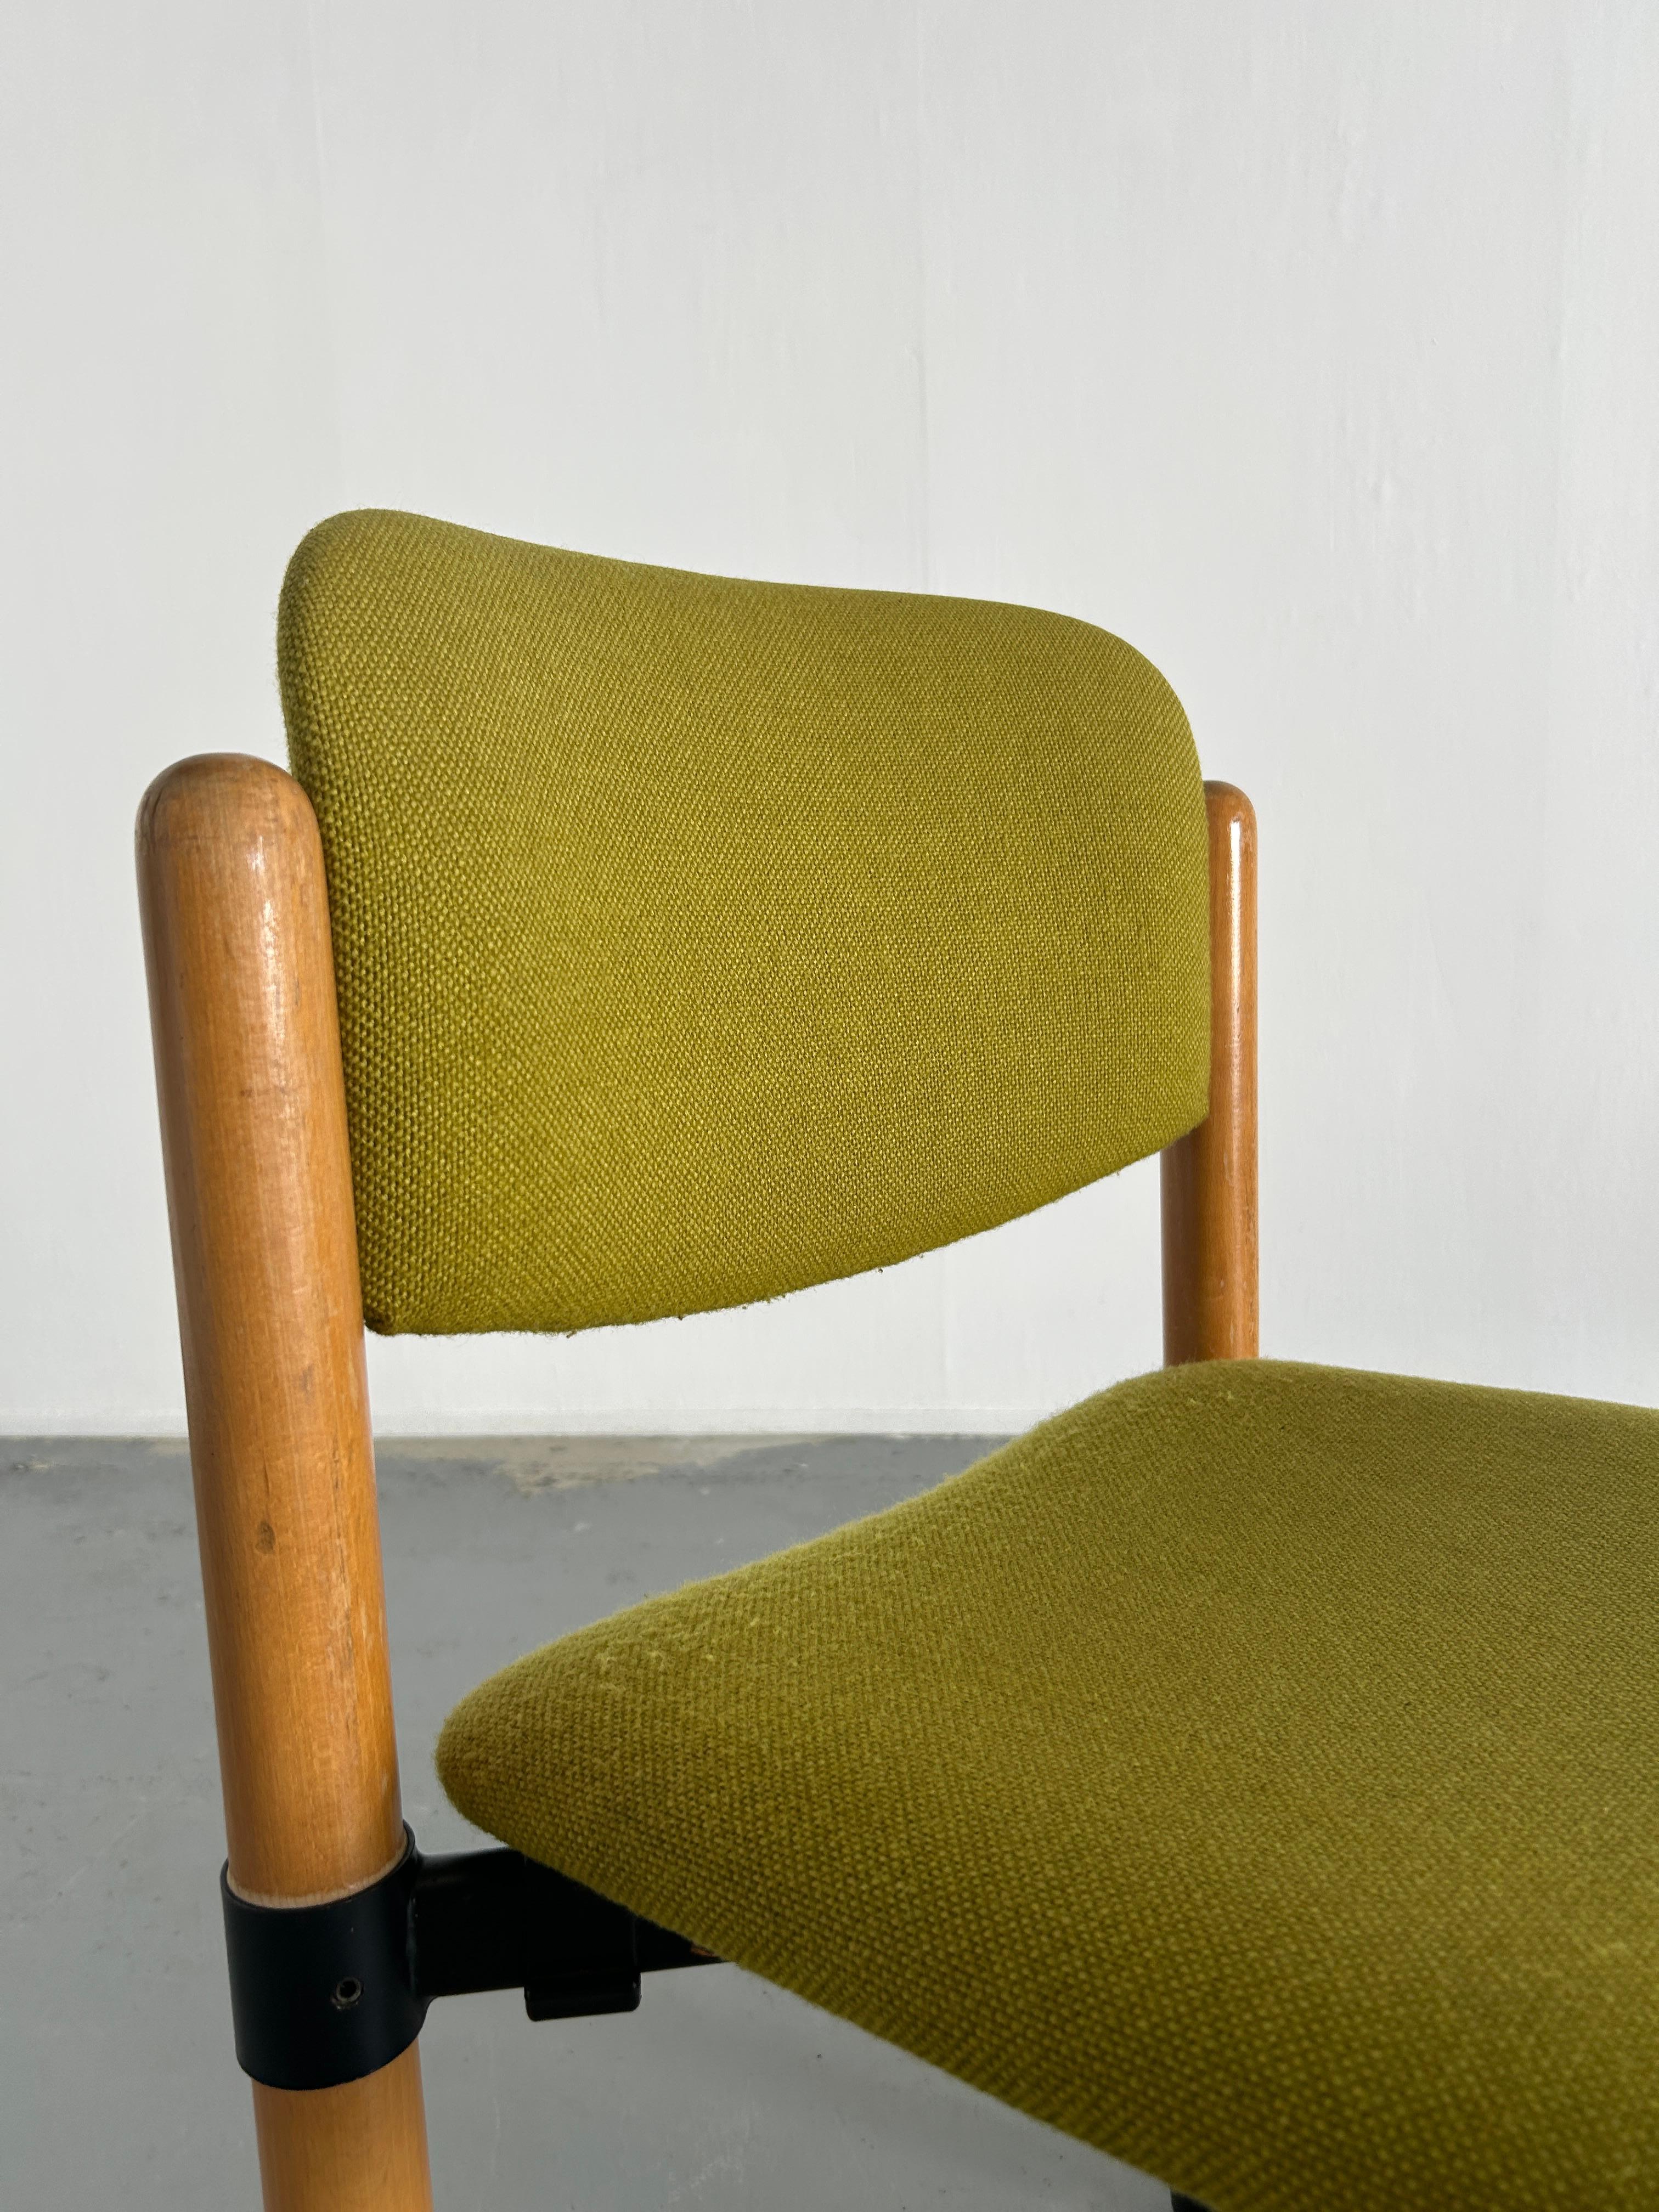 1/10 Mid Century Modern Stackable Dining Chairs by Fröscher Sitform, 70s Germany 6